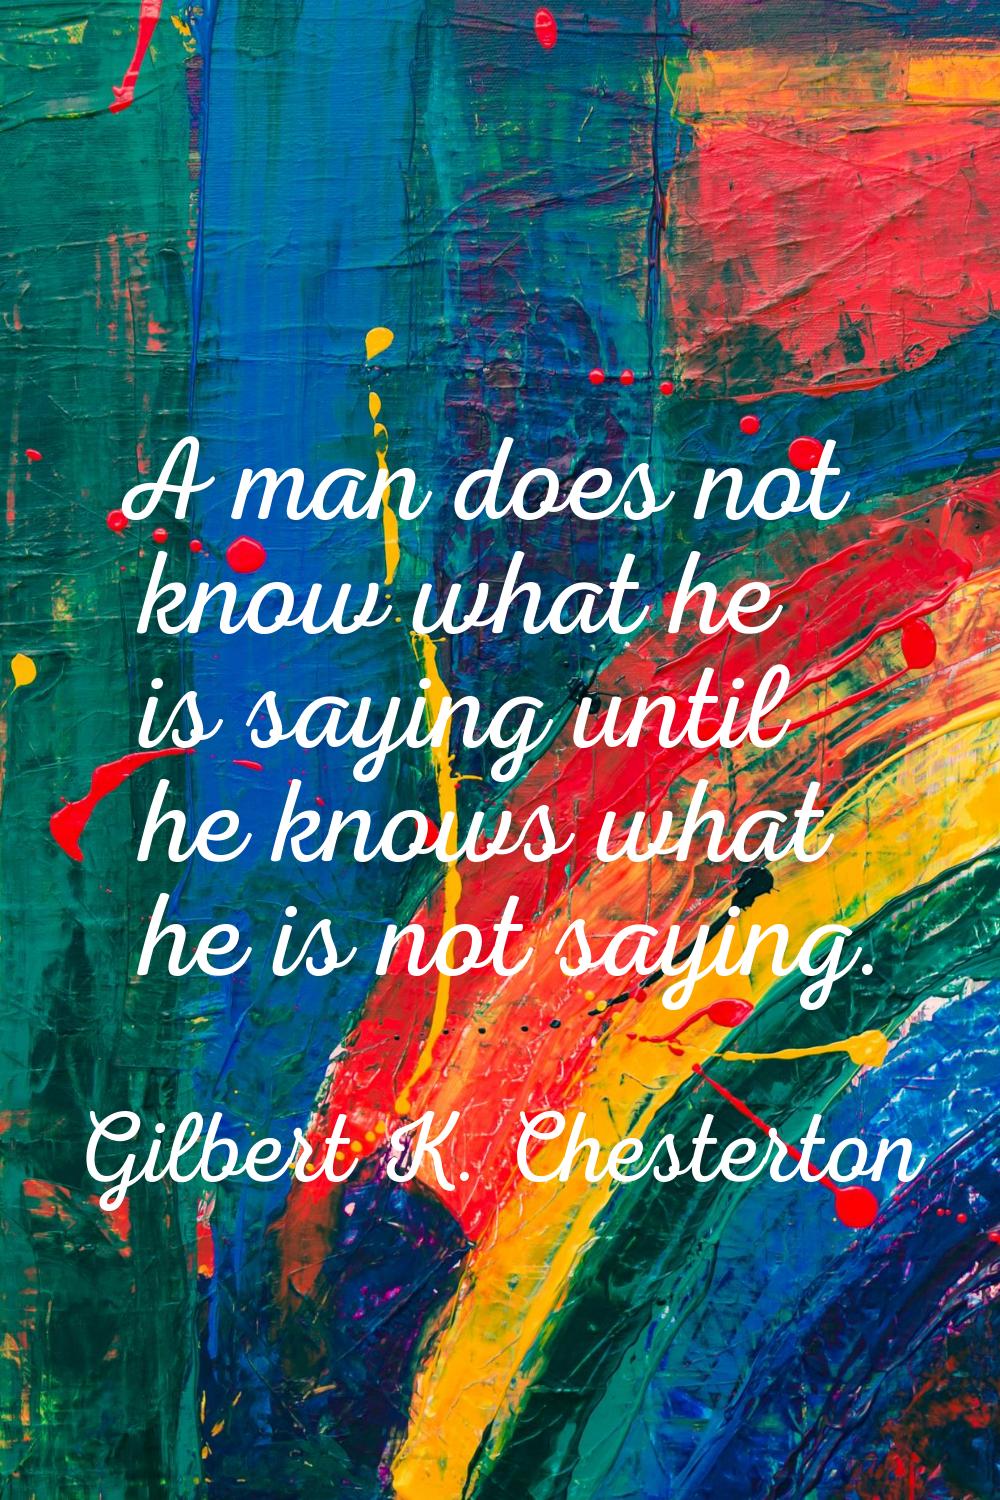 A man does not know what he is saying until he knows what he is not saying.